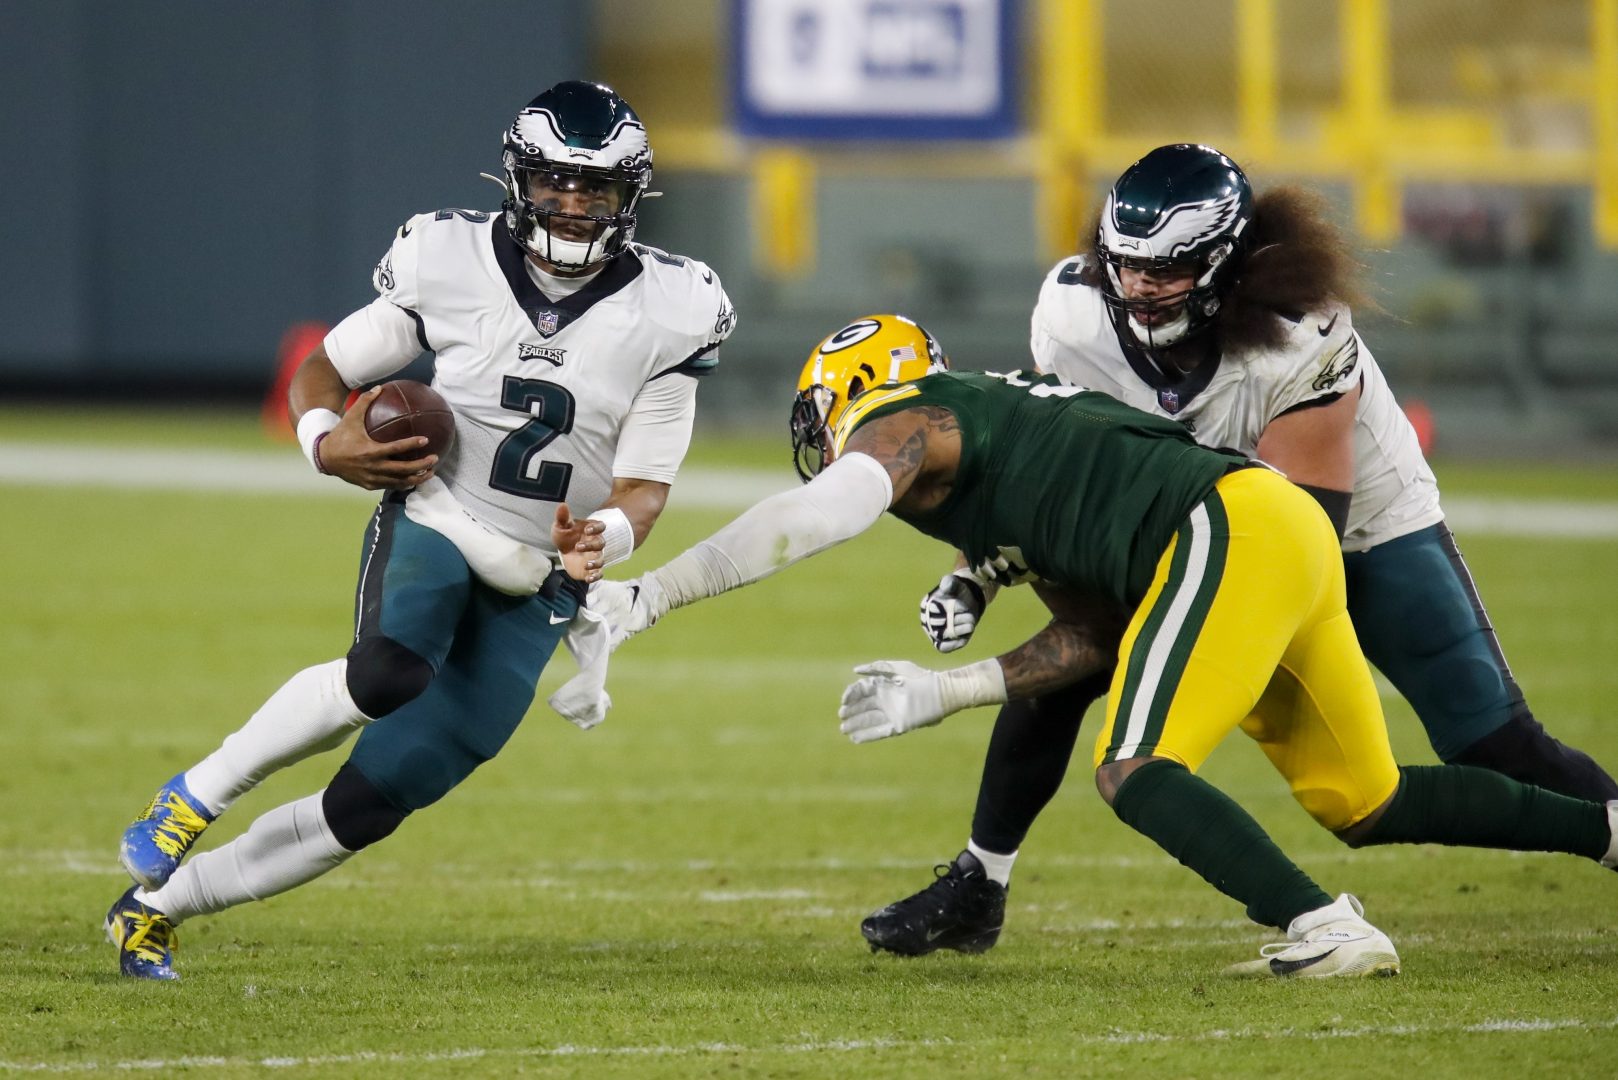 Carson Wentz benched for Jalen Hurts; Eagles fall to Green Bay